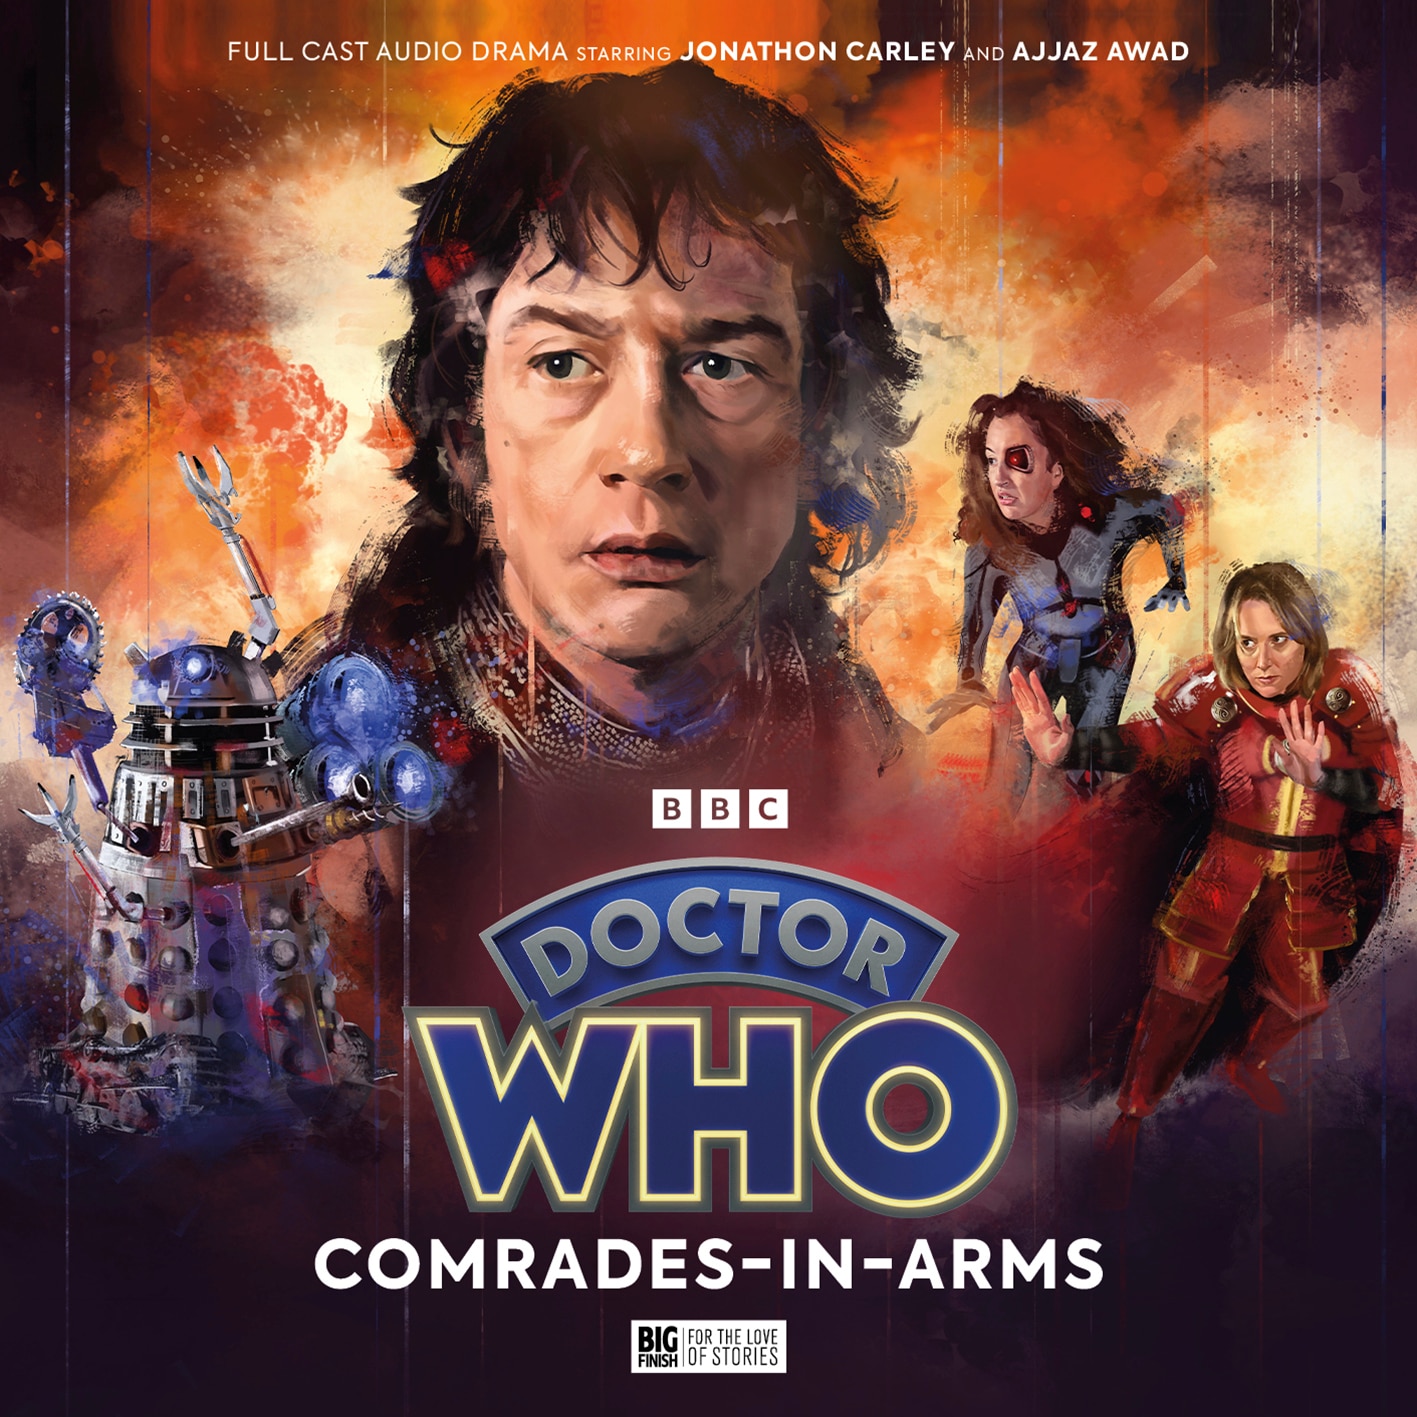 The War Doctor Begins - Comrades-in-Arms